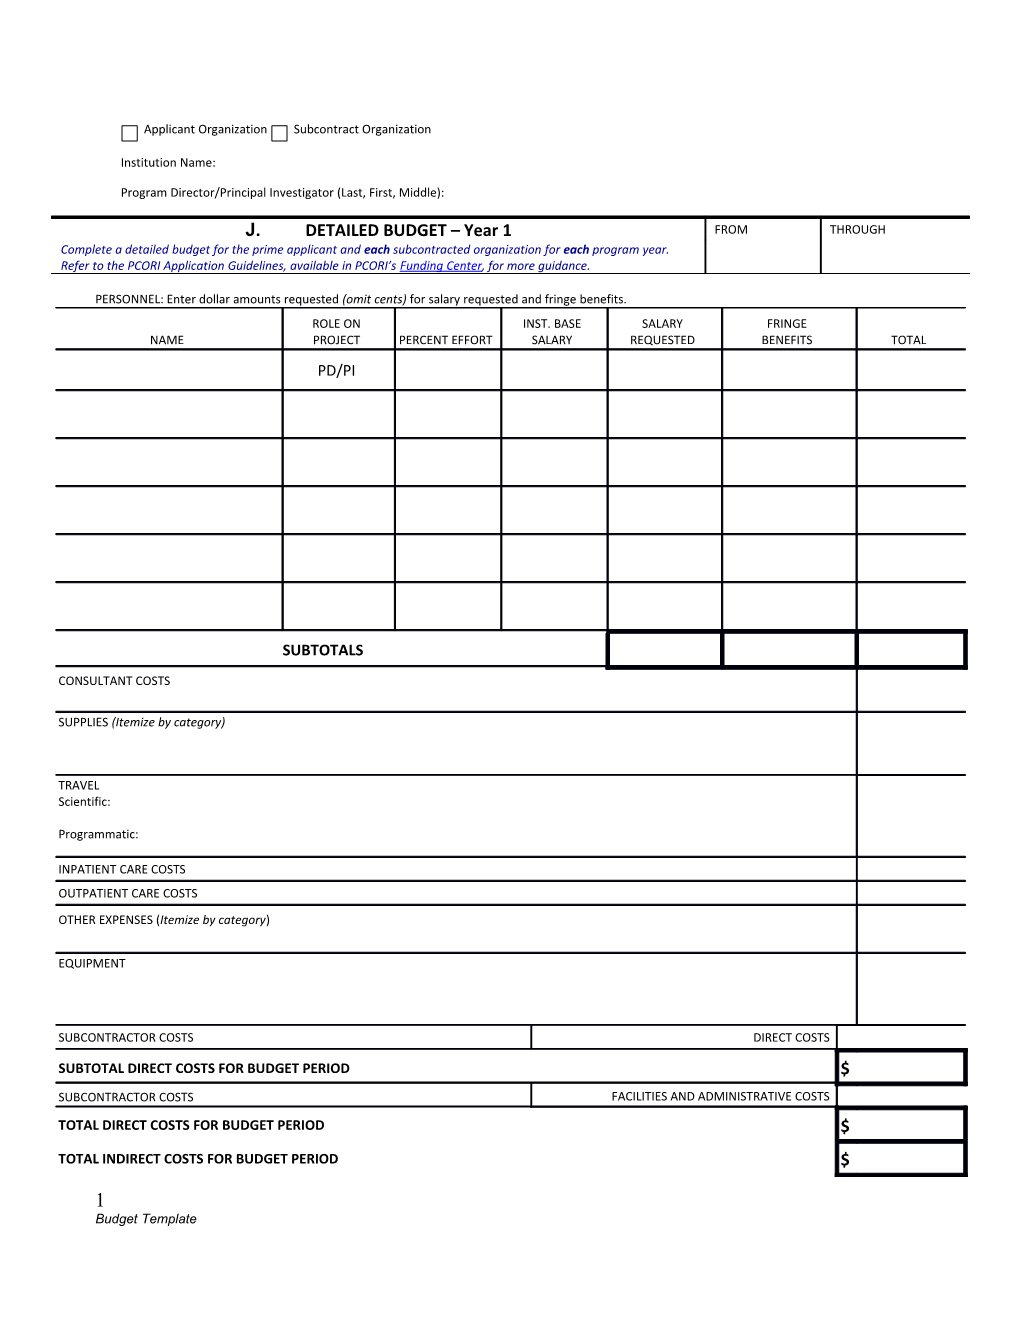 PHS 398 (Rev. 08/12), OMB No. 0925-0001, Detailed Budget for Initial Budget Period, Form Page 4